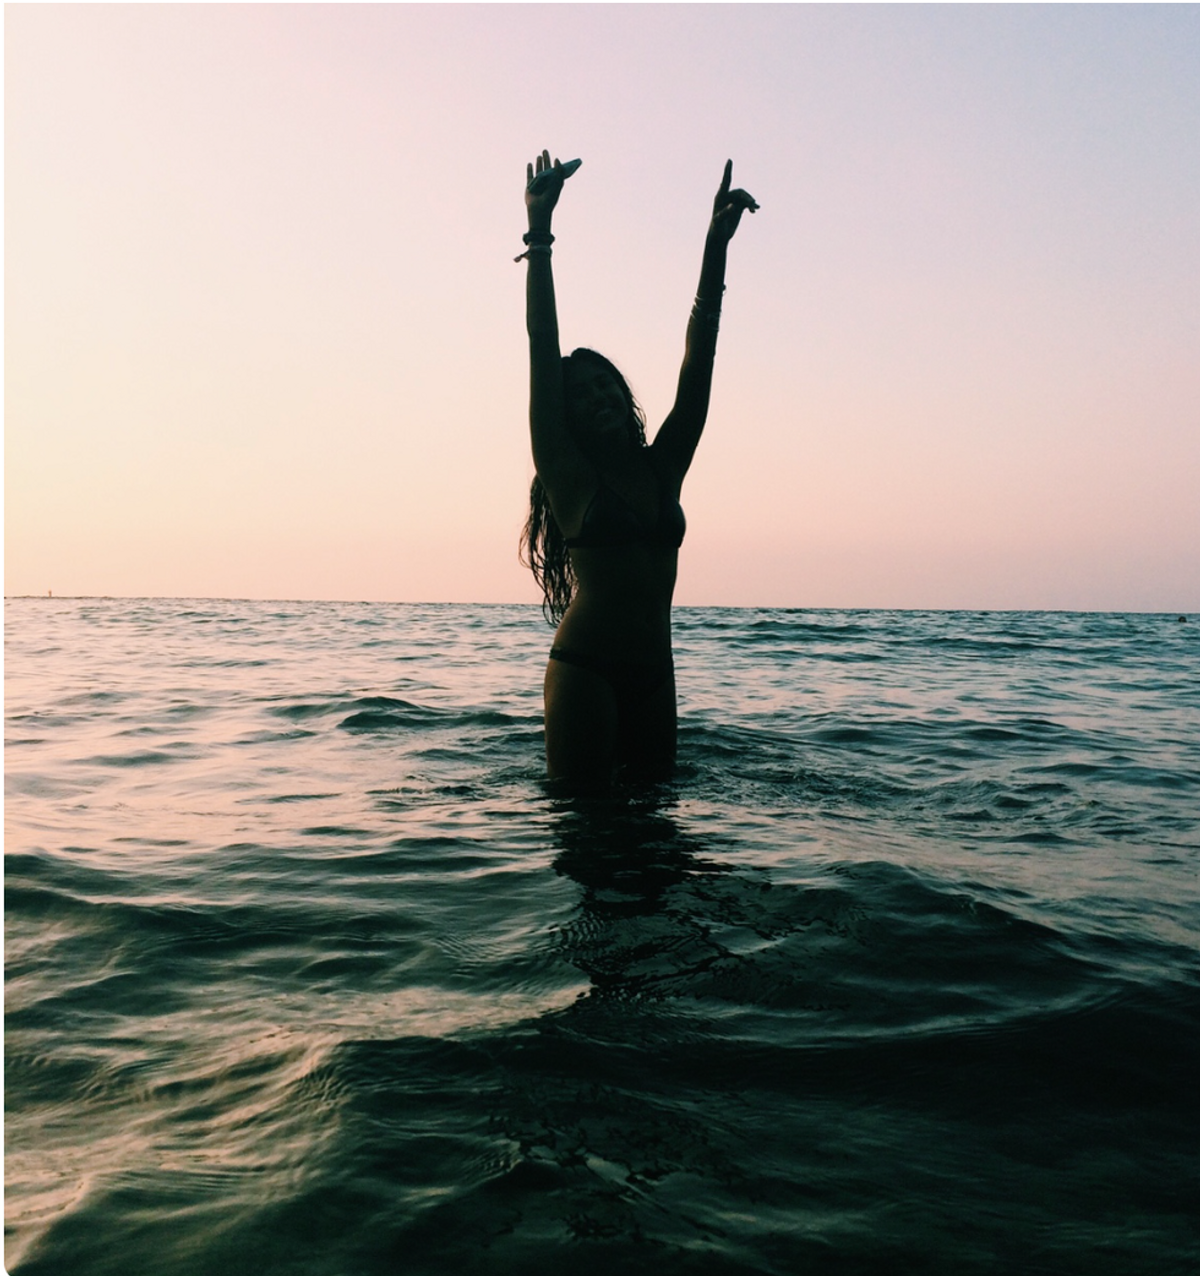 12 Pieces of Advice to Get You Through Whatever Life Throws Your Way